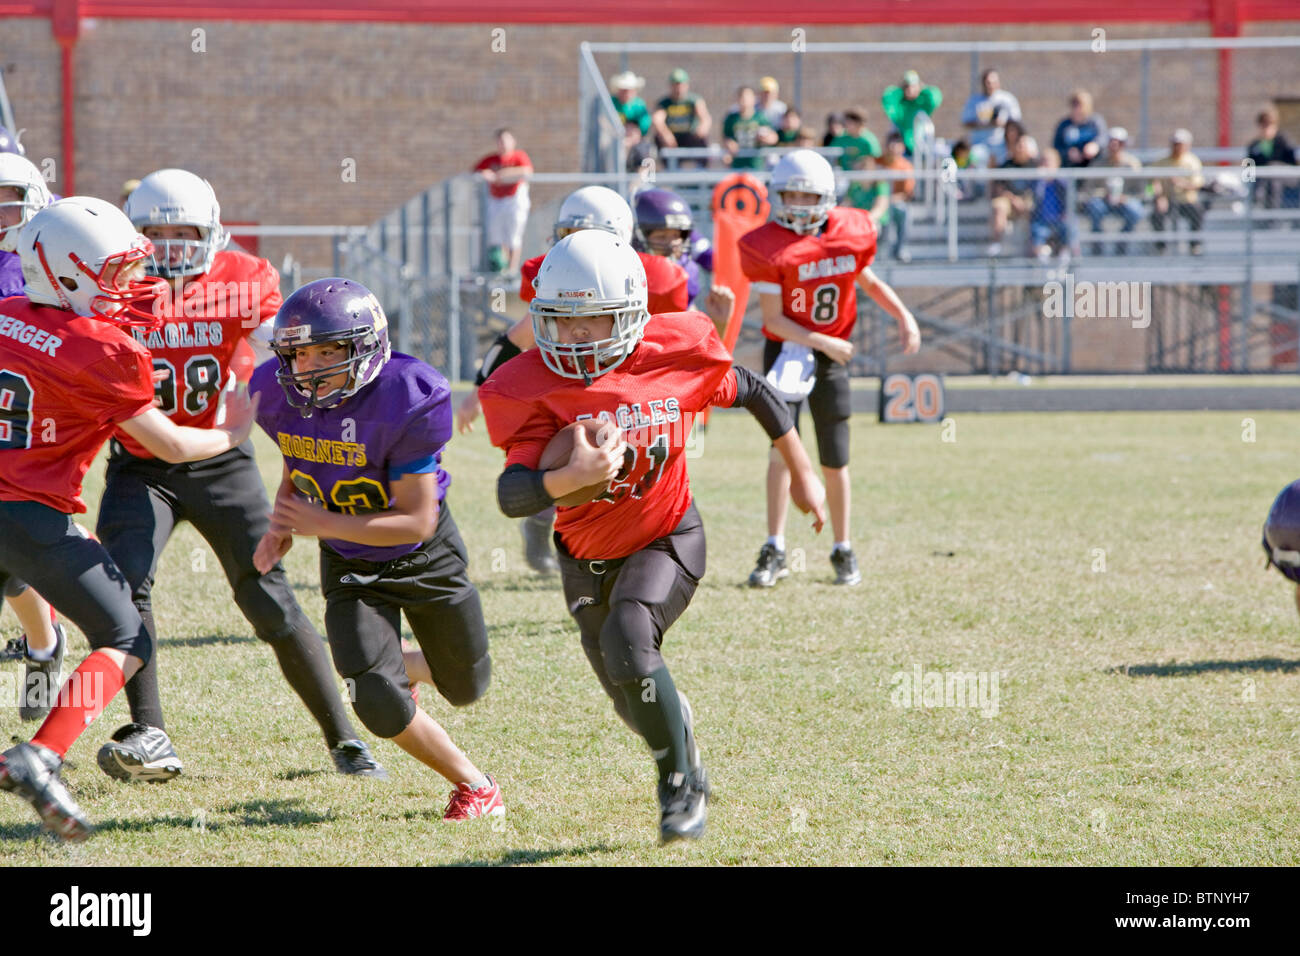 Youth American football with players running play and one carrying ball Stock Photo